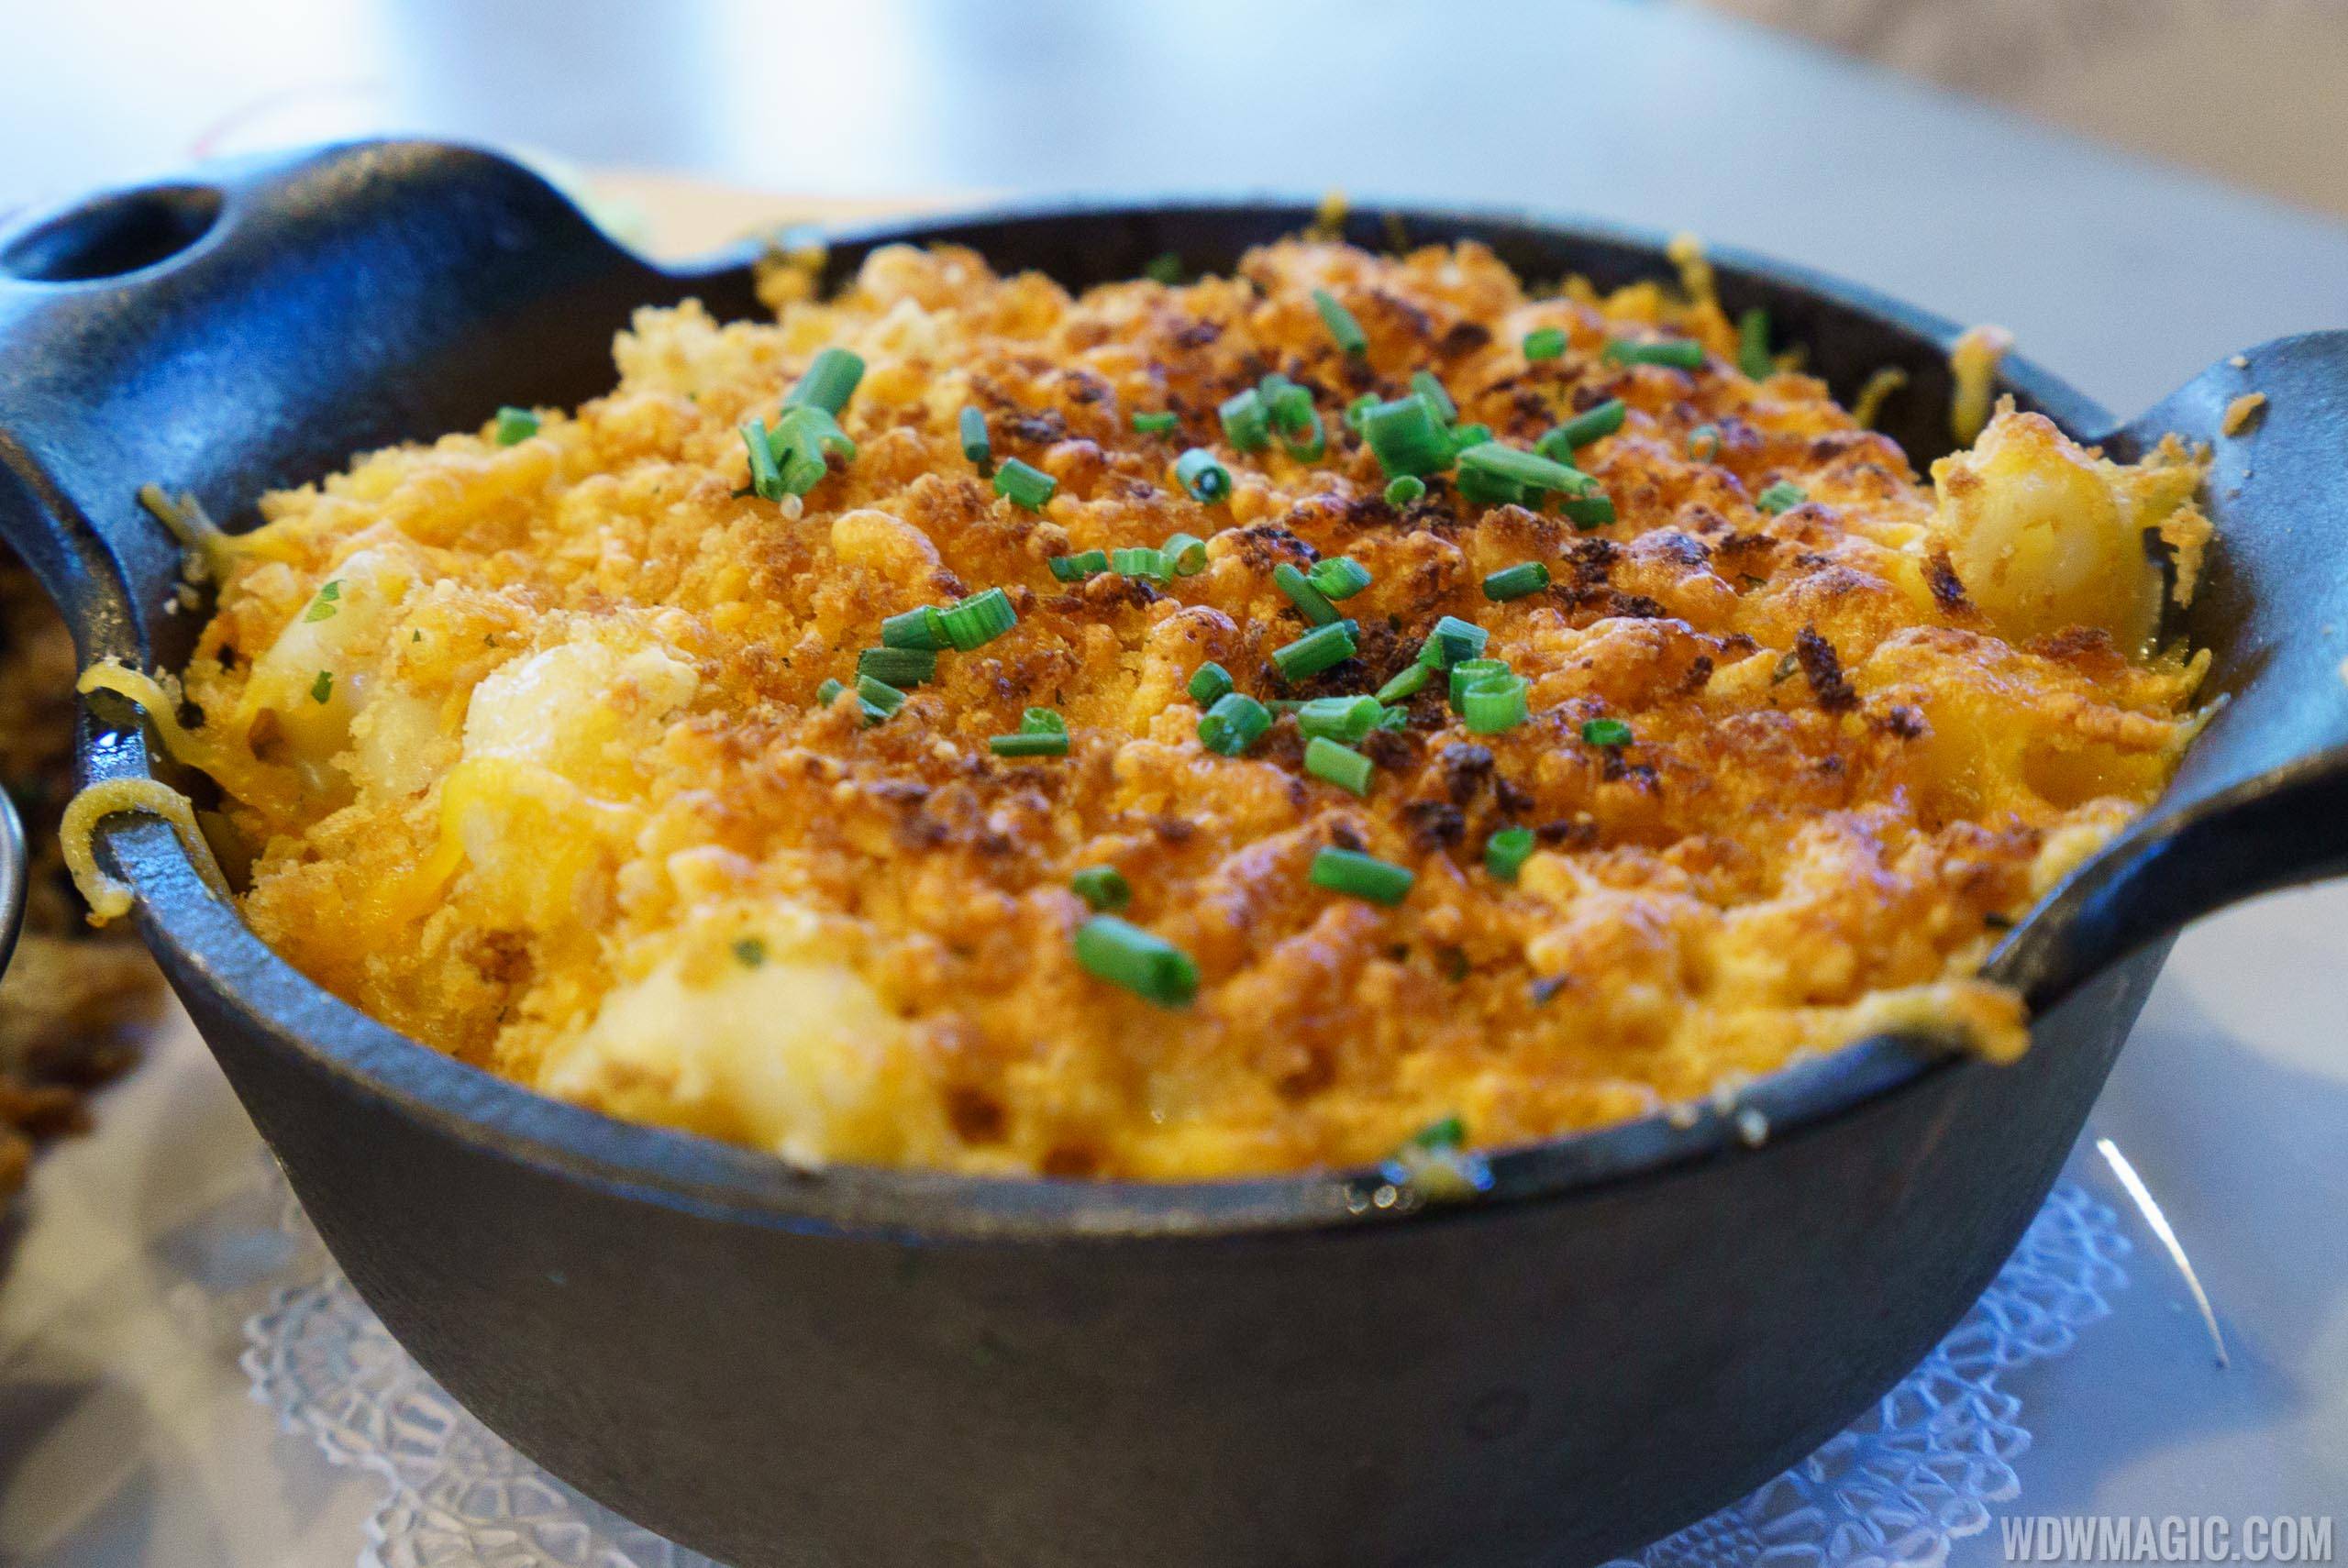 Homecoming restaurant - Momma's Mac and Cheese